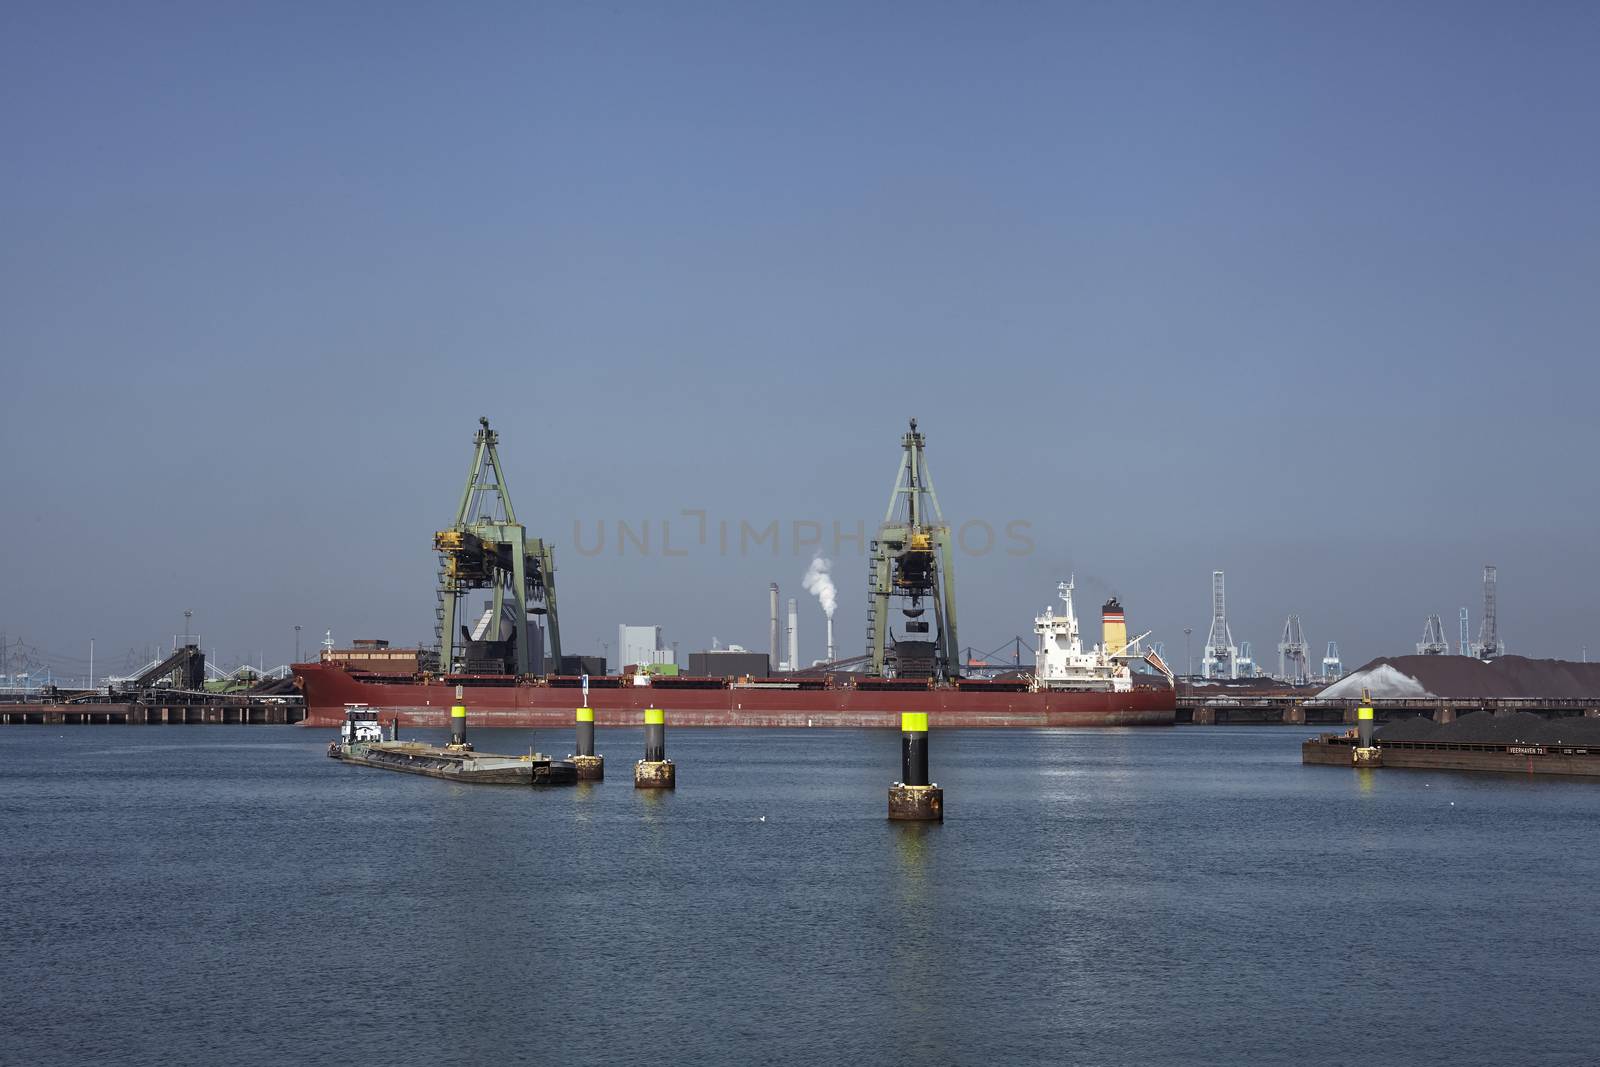 coal industry in the harbor of rotterdam netherlands. Vessel loading coal